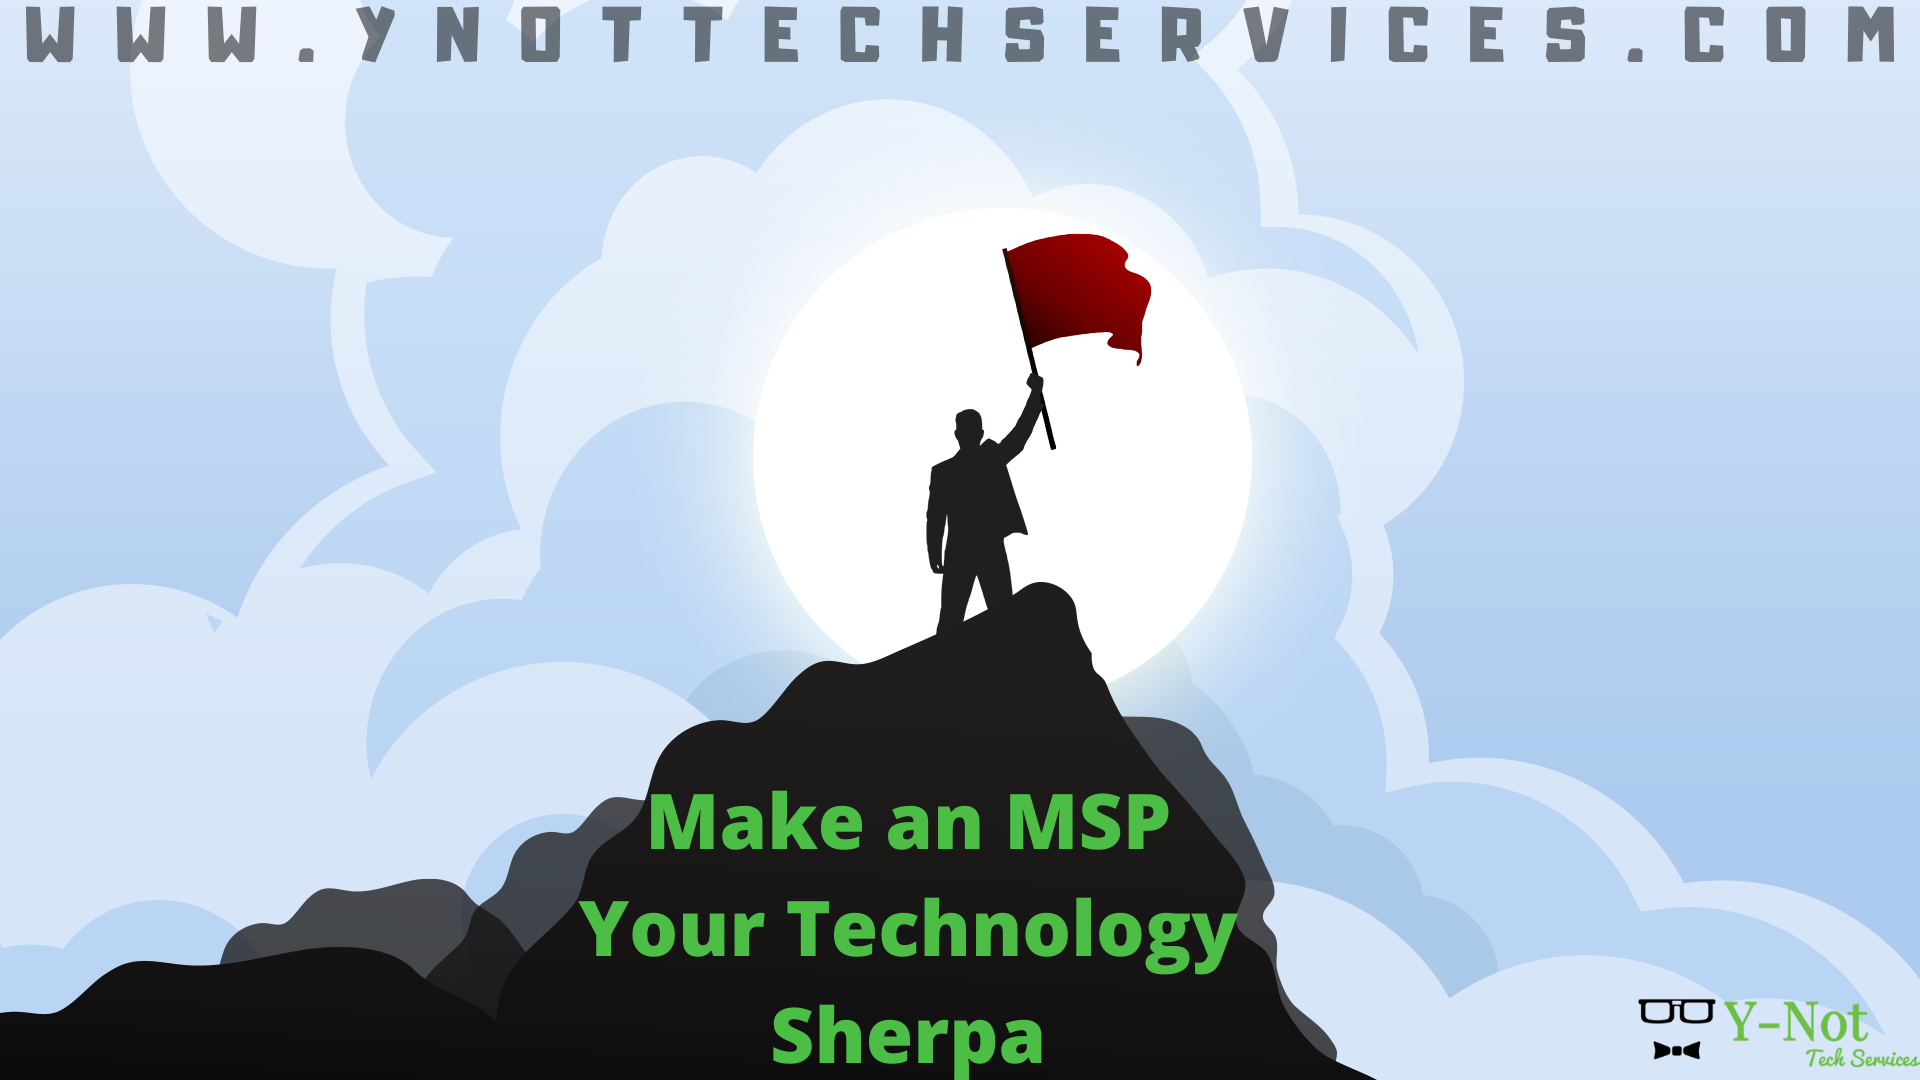 Make an MSP Your Technology Sherpa | Y-Not Tech Services - Lethbridge, AB IT Support